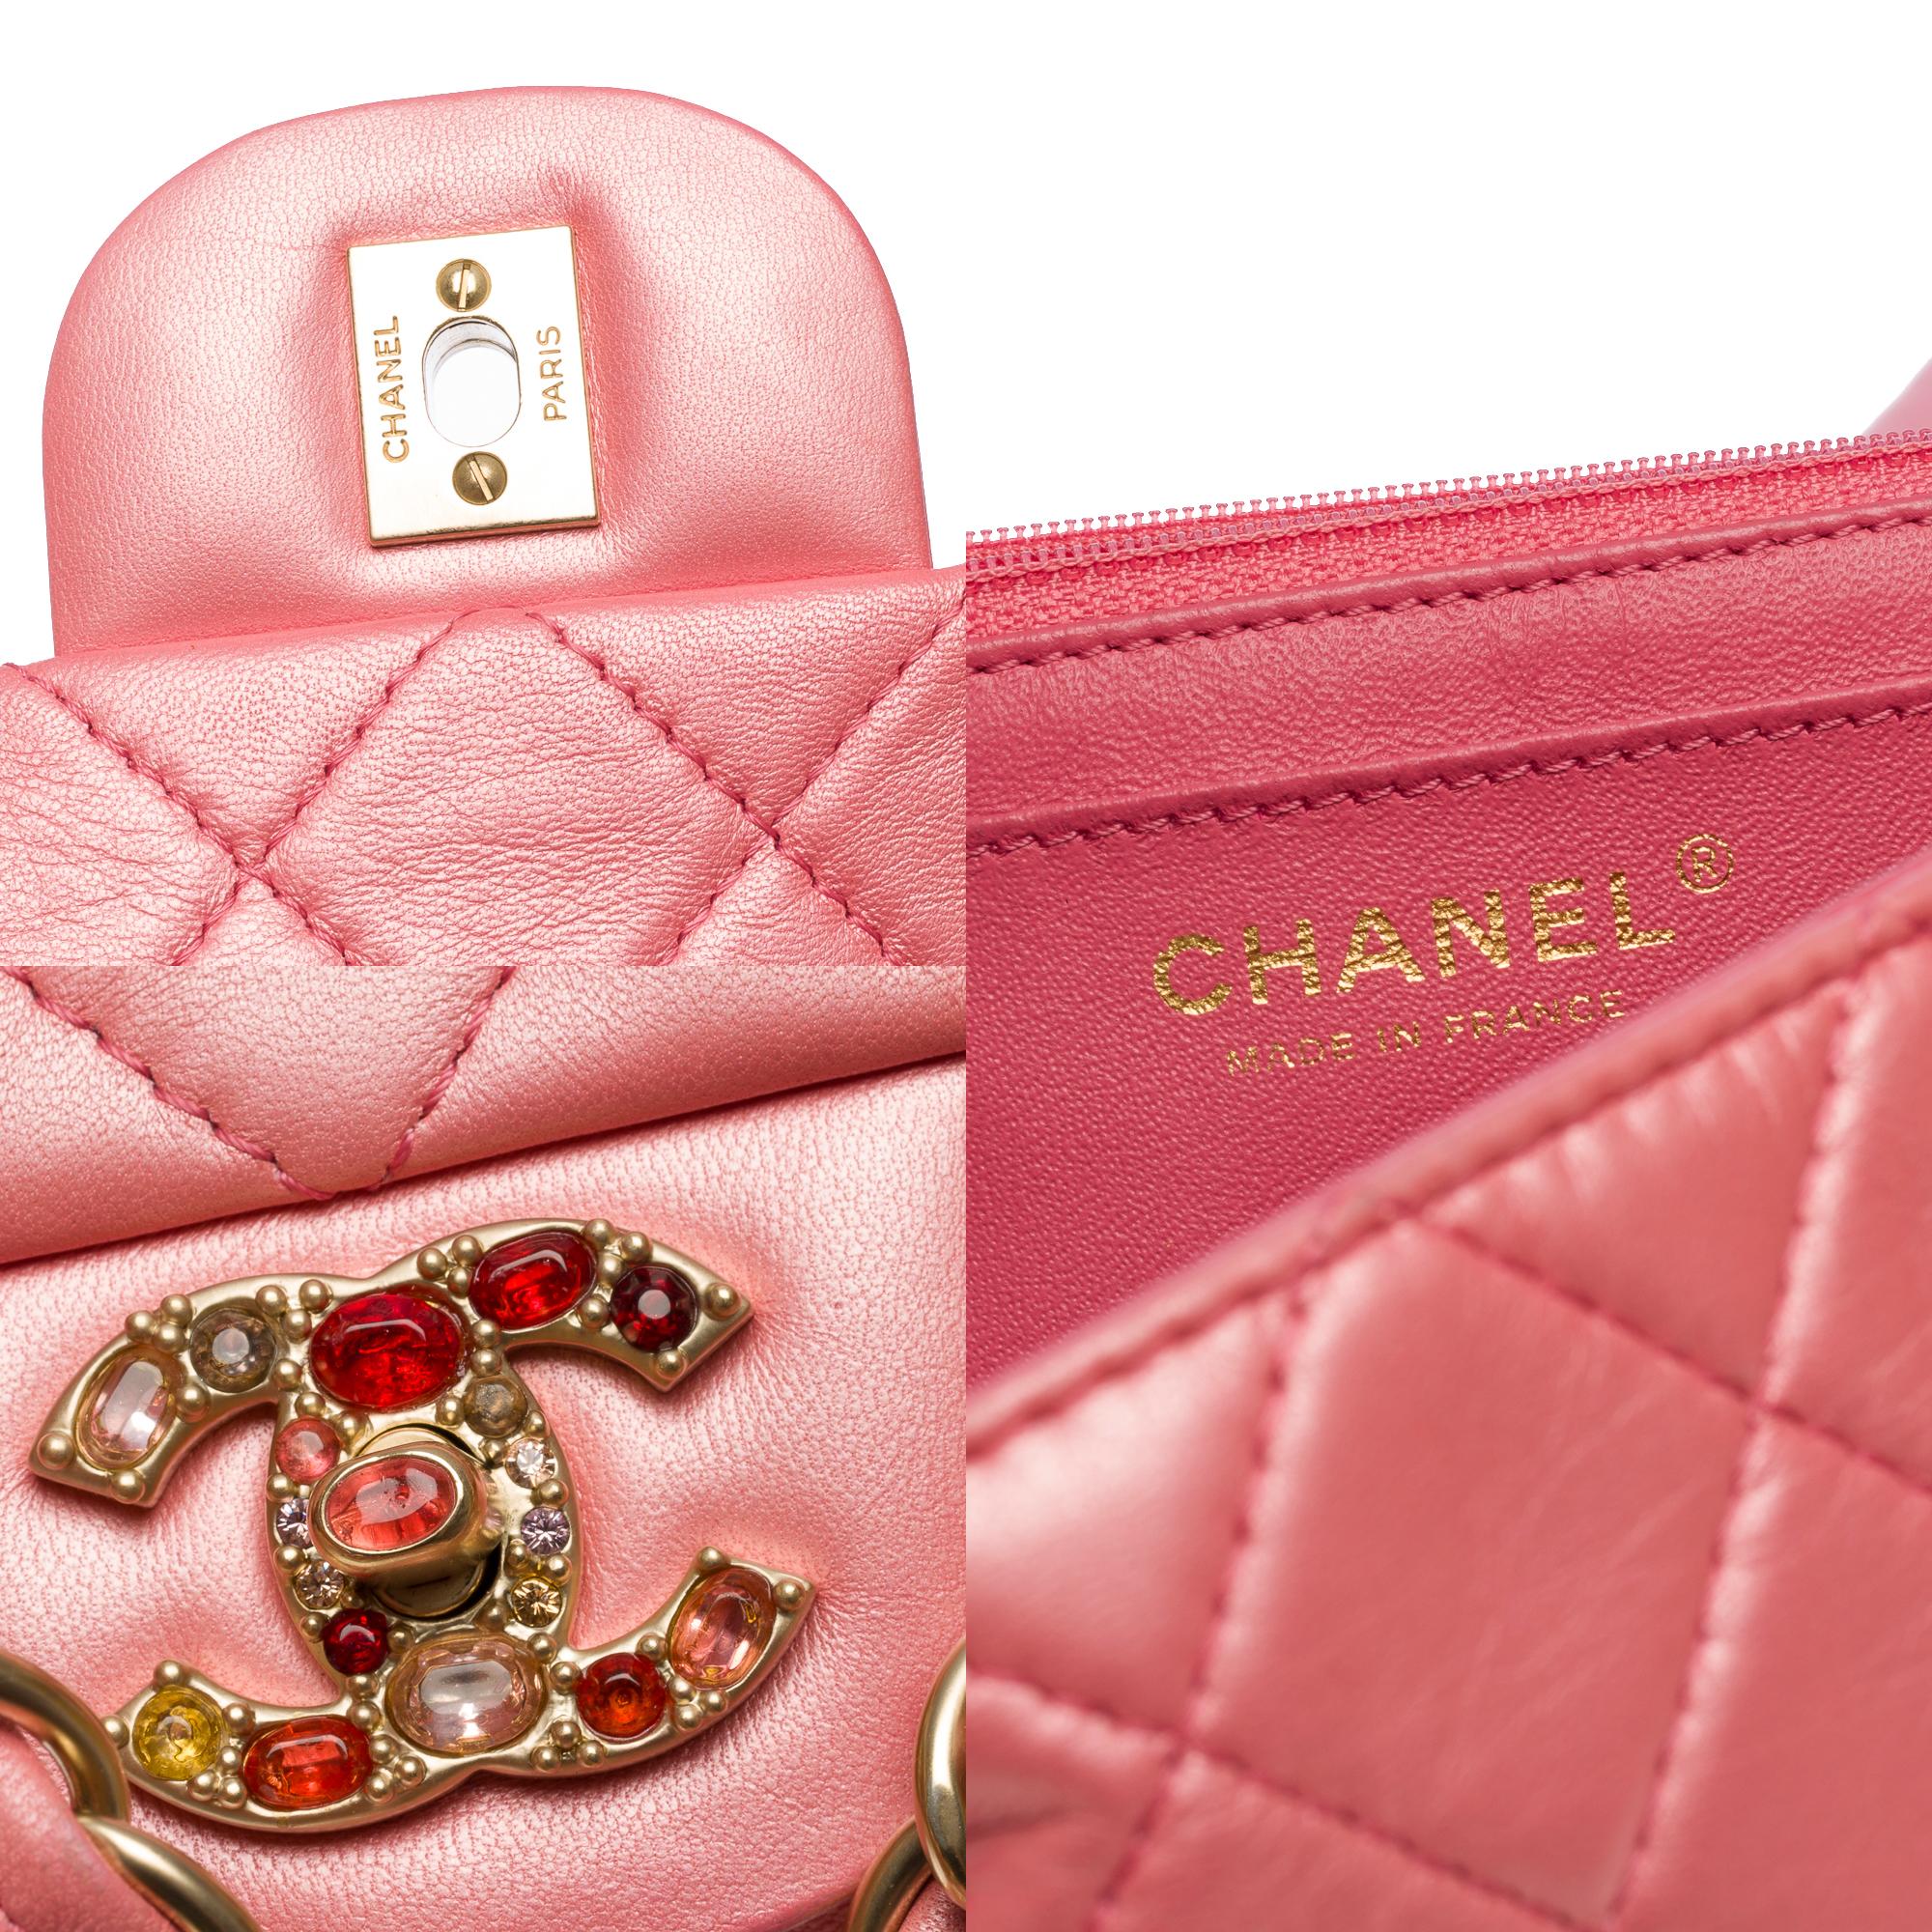 Chanel limited edition shoulder flap bag in Metallic Pink quilted leather, MGHW For Sale 1